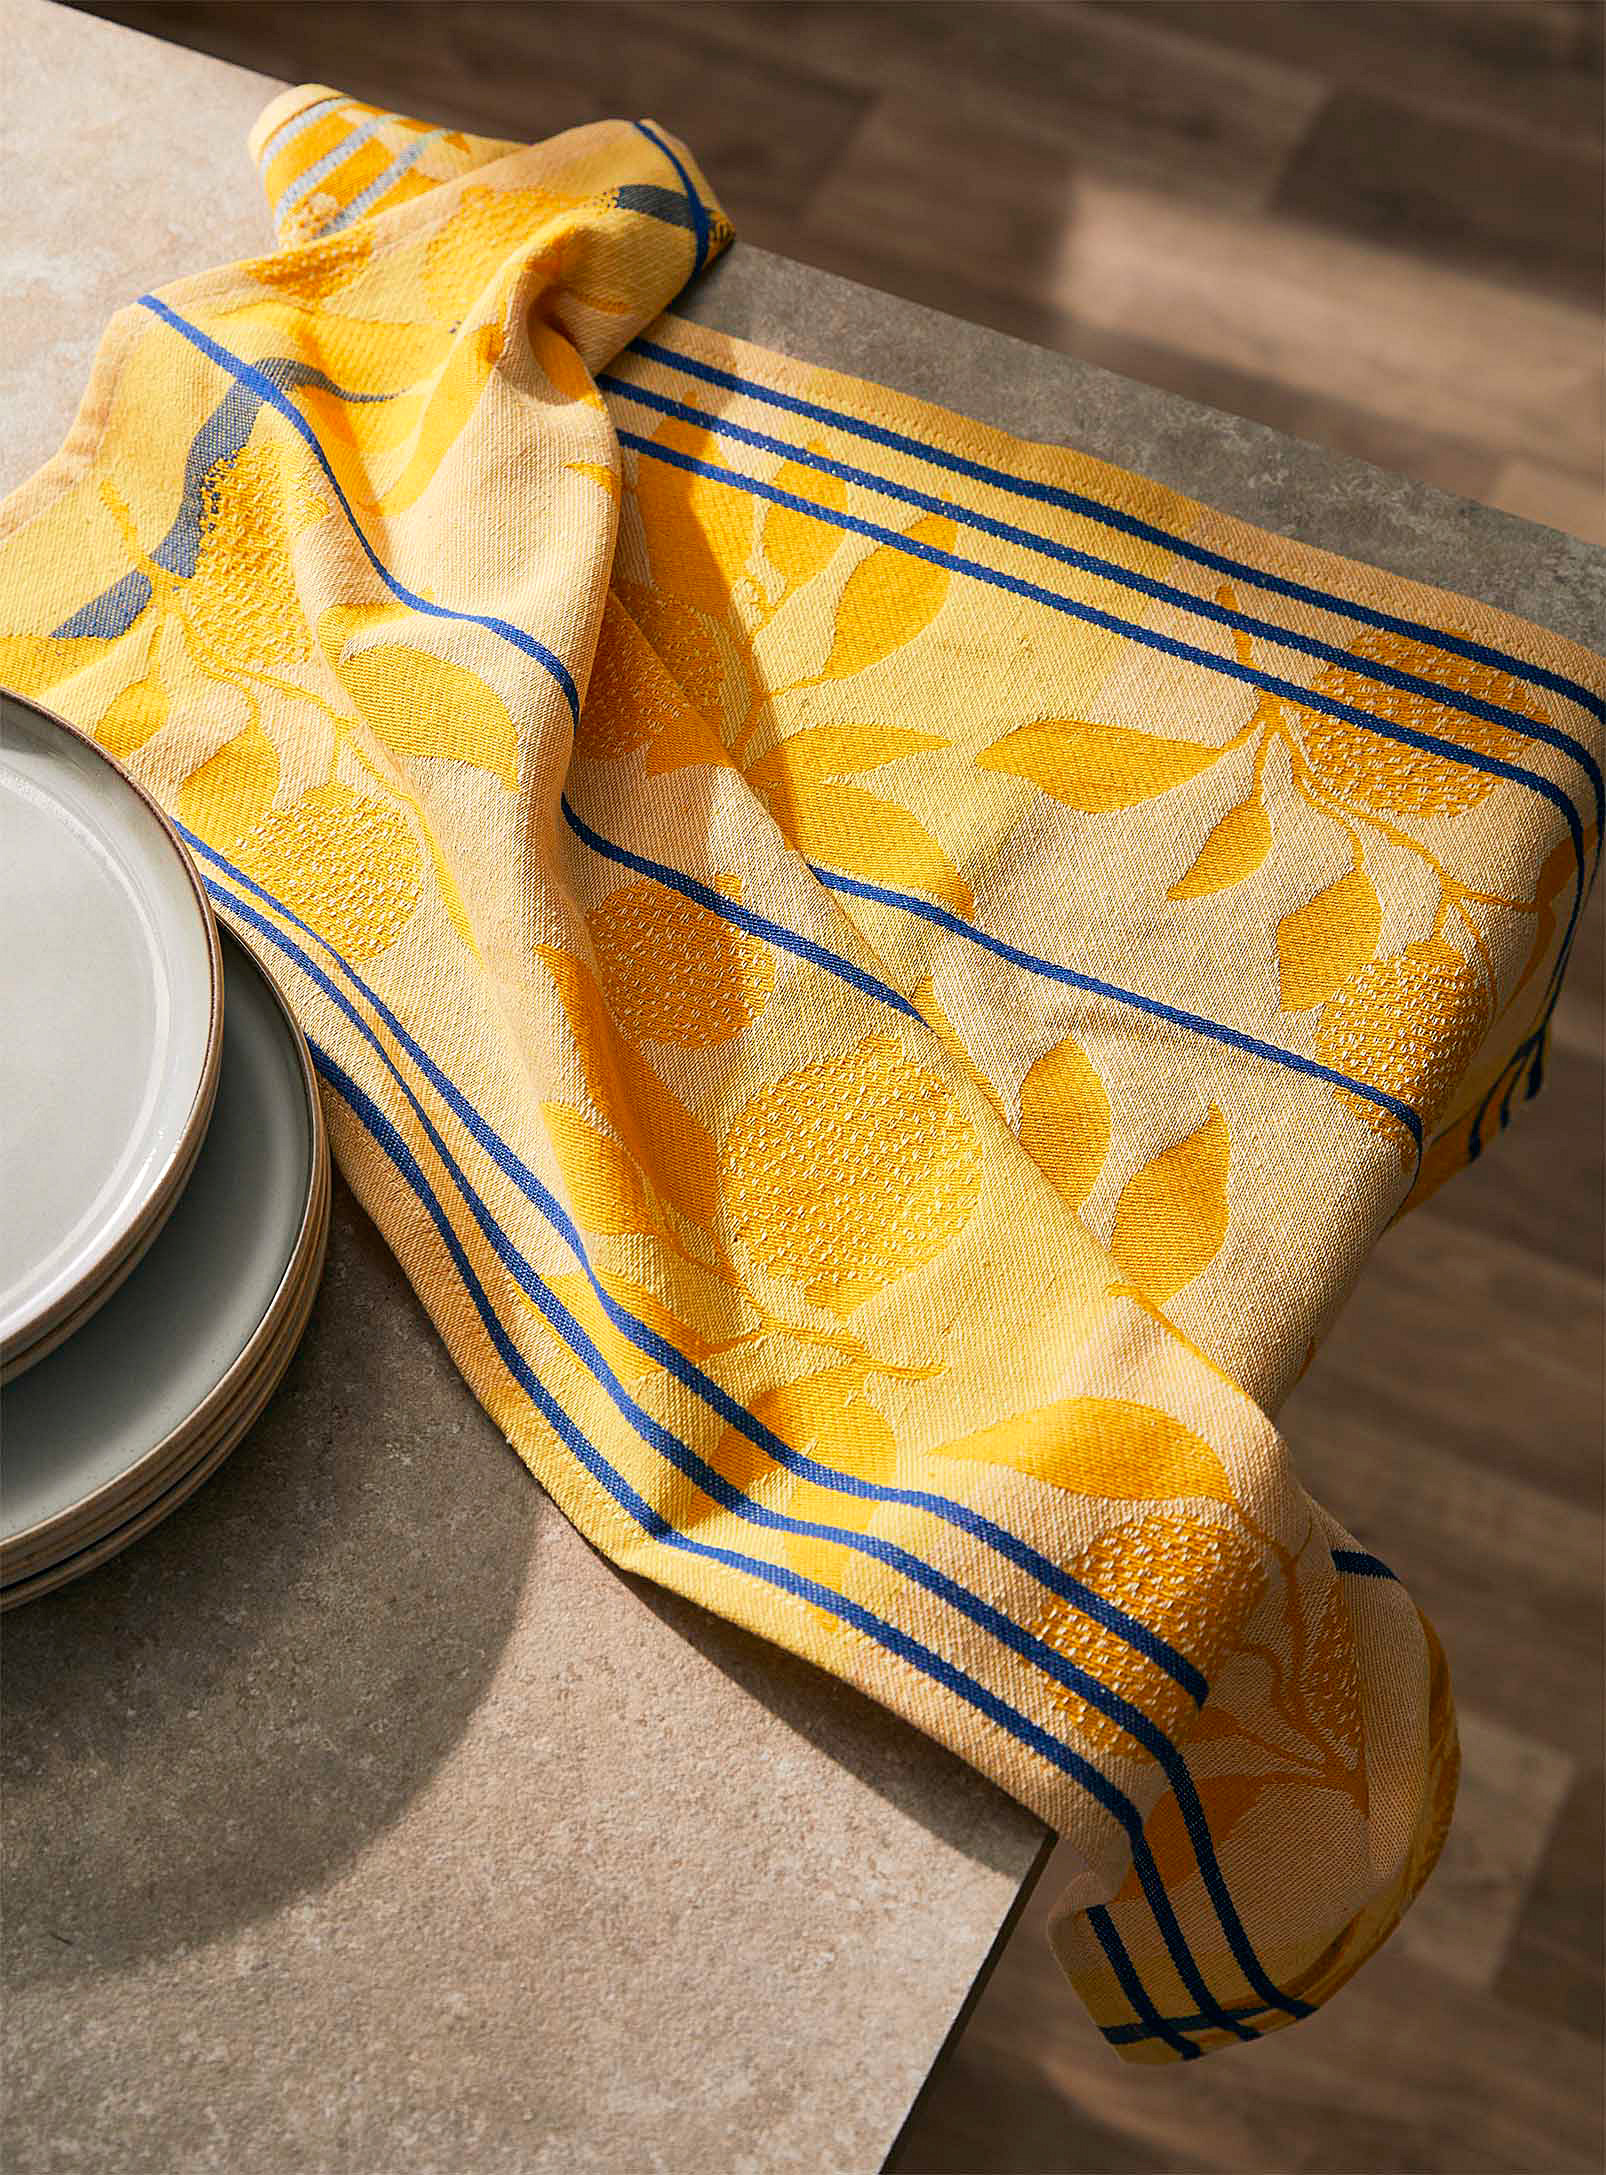 Danica Orchard Harvest Jacquard Tea Towel In Patterned Yellow